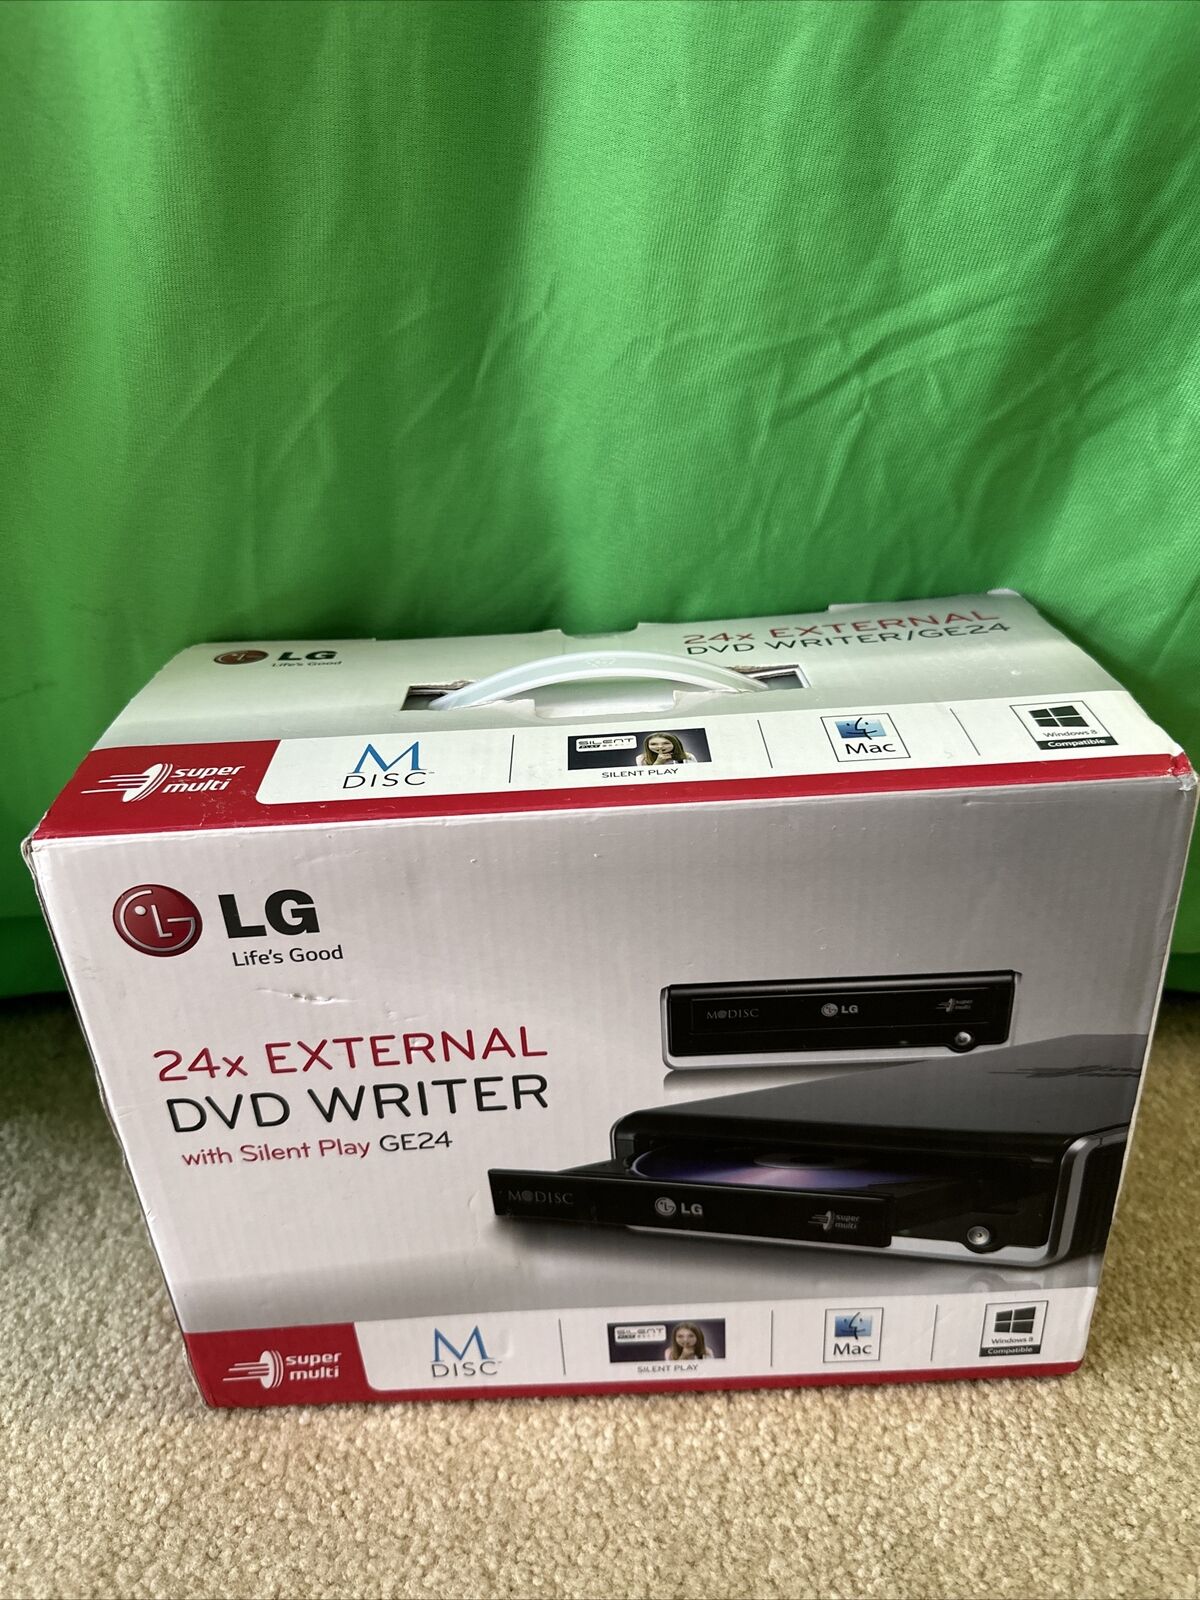 LG 24X External Super Multi M-Disc DVD Writer With Silent Play GE24 *NEW*